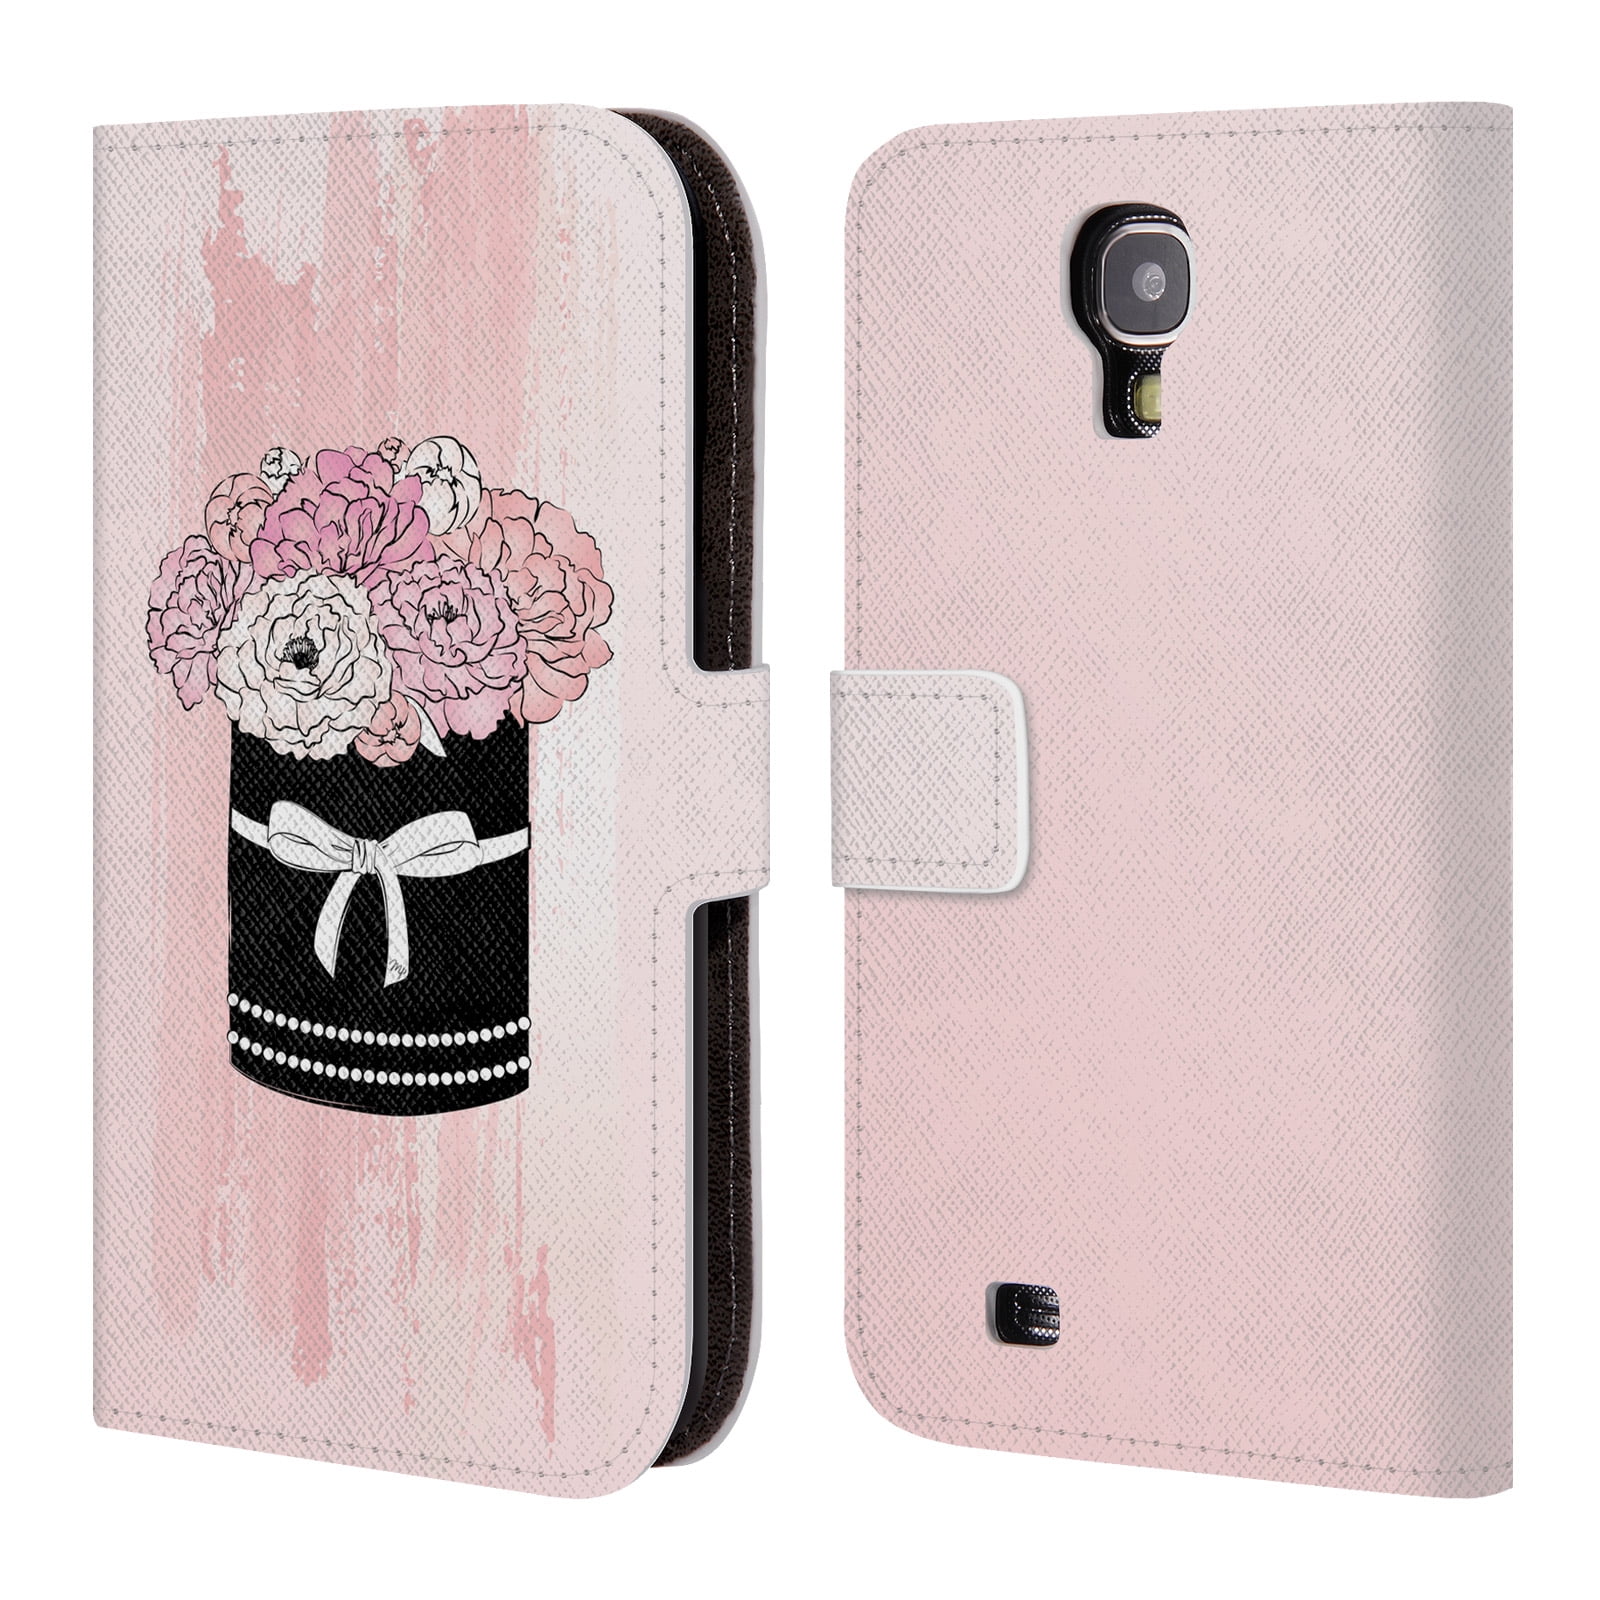 OFFICIAL MARTINA ILLUSTRATION GIRLY DESIGNS LEATHER BOOK WALLET CASE ...